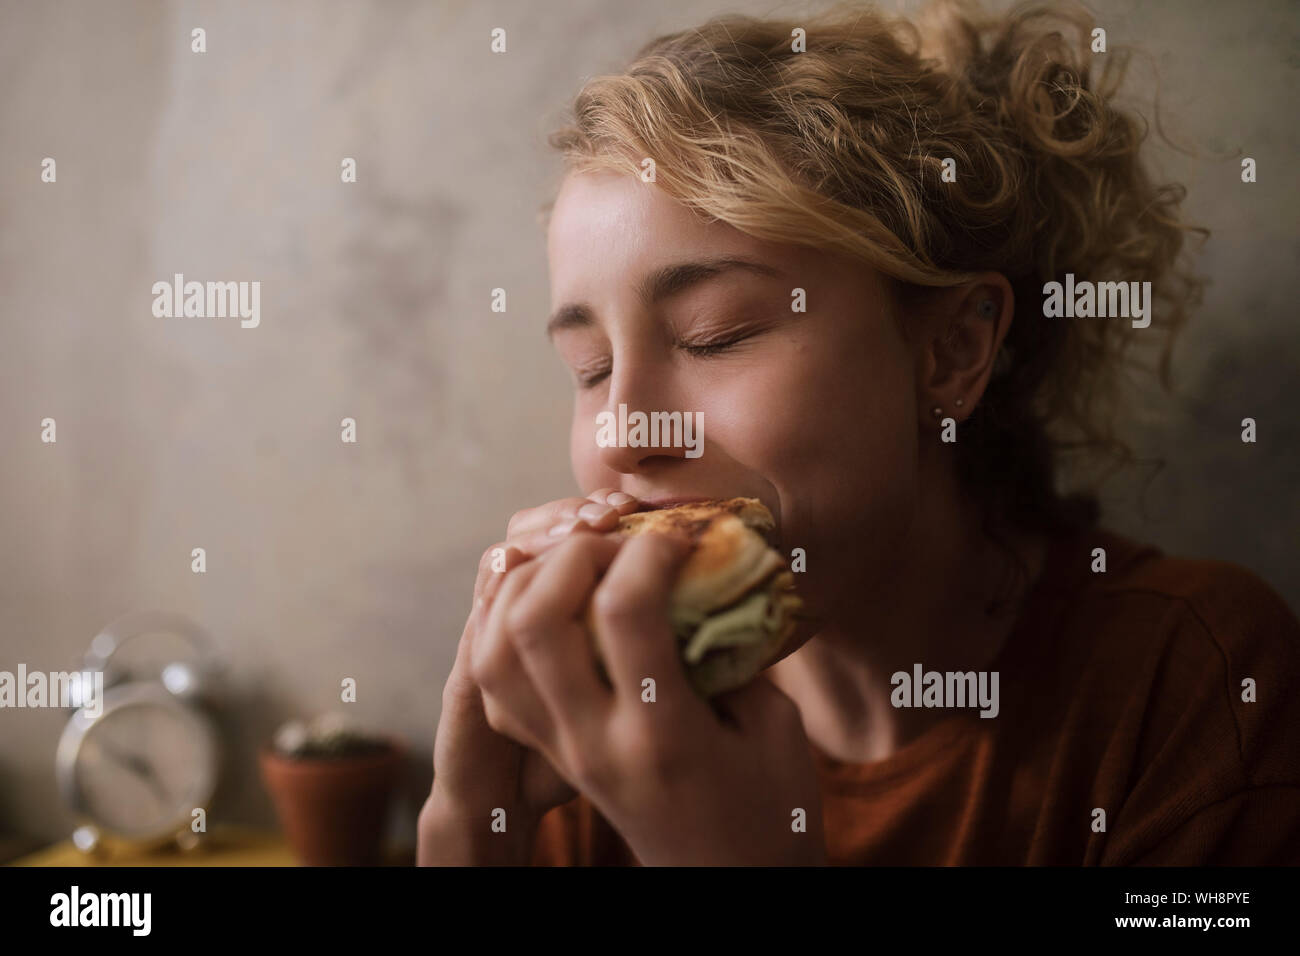 Portrait of young woman eating Hamburger Stock Photo